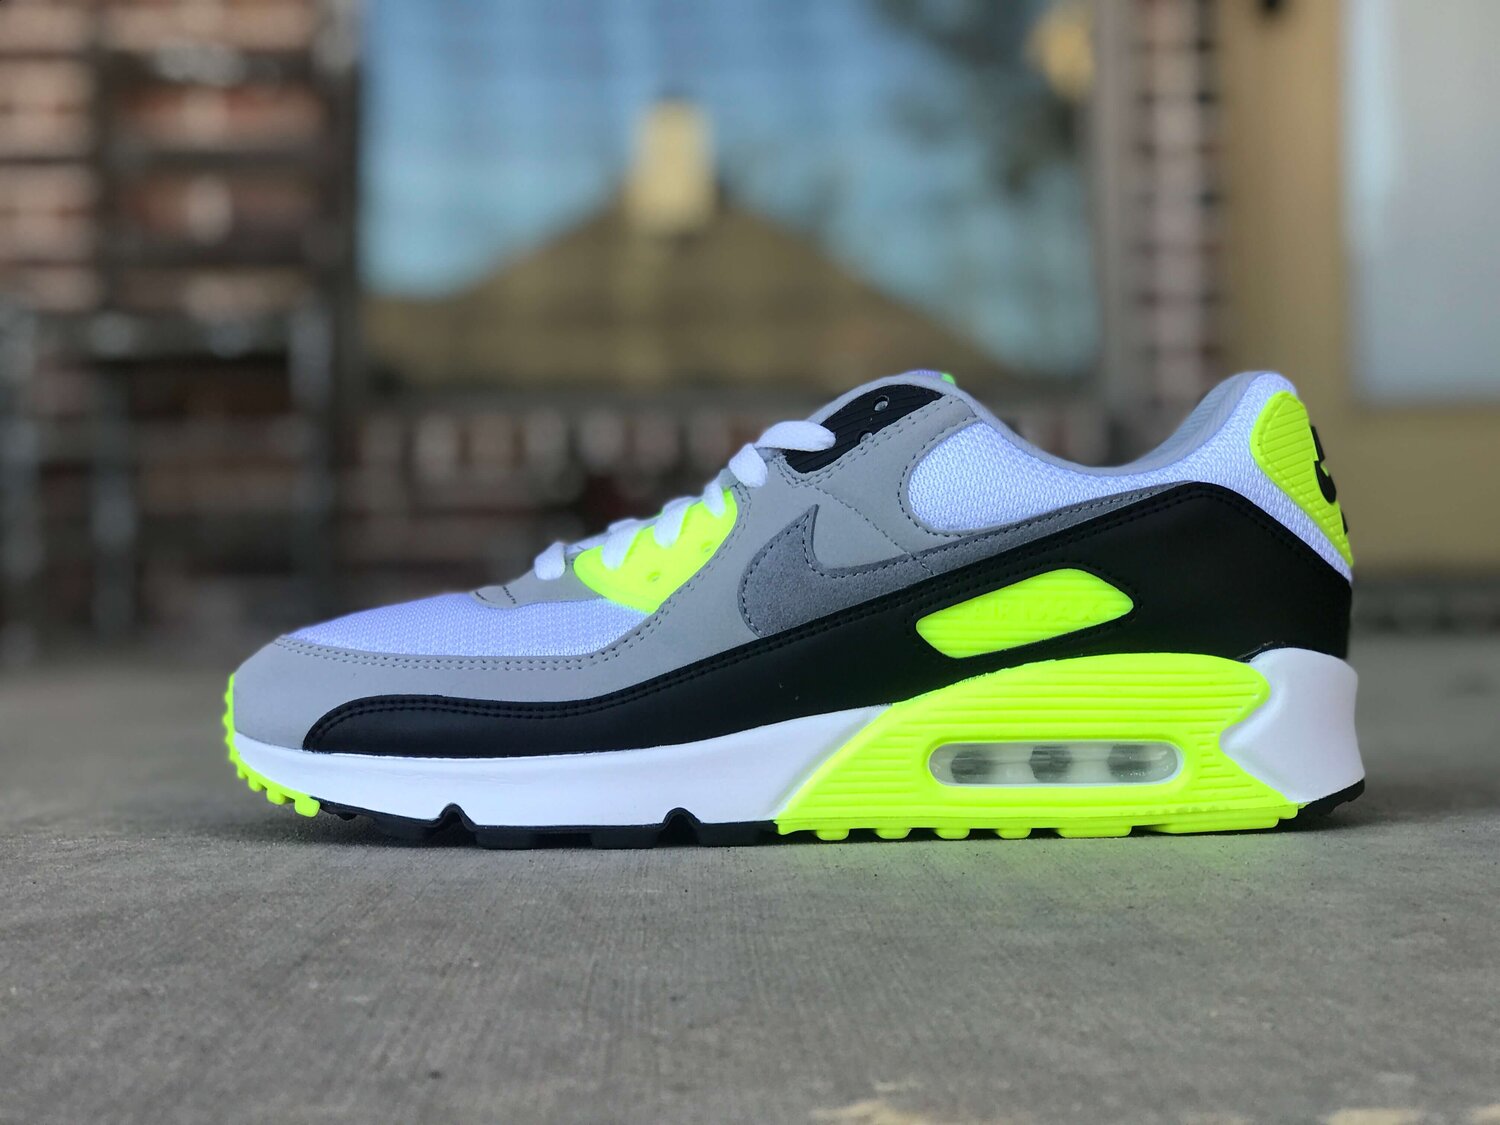 A Unboxing Of The 2020 Nike Air Max 90 "Volt" [Must Watch] | The Retro Insider